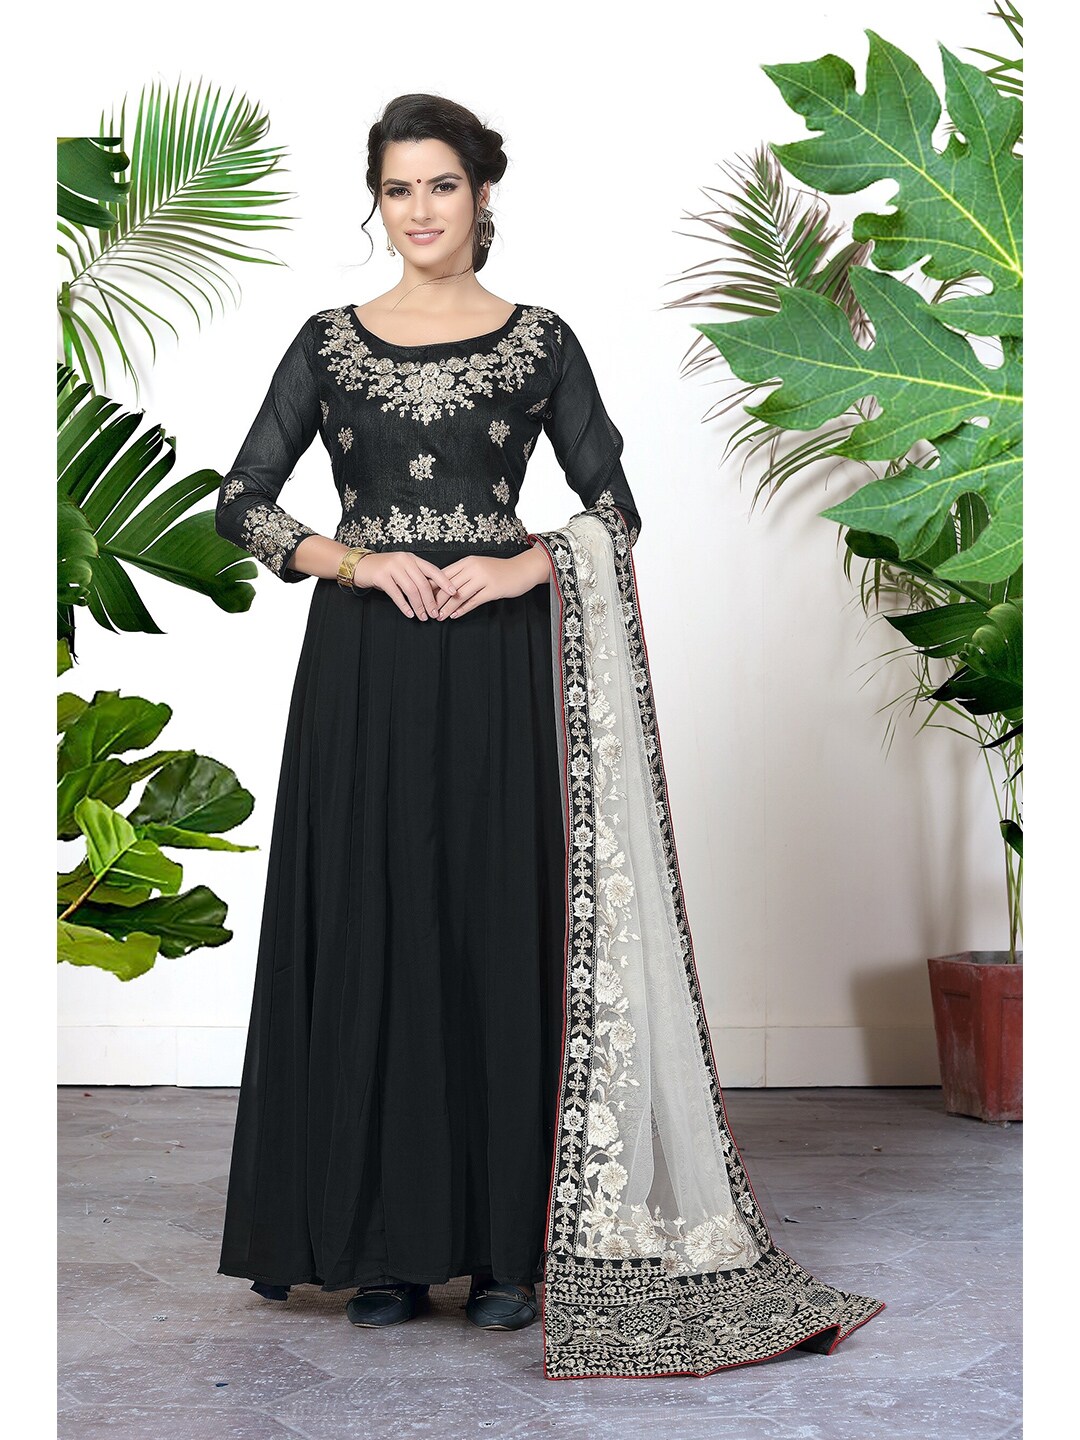 Divine International Trading Co Black & White Embroidered Unstitched Dress Material Price in India